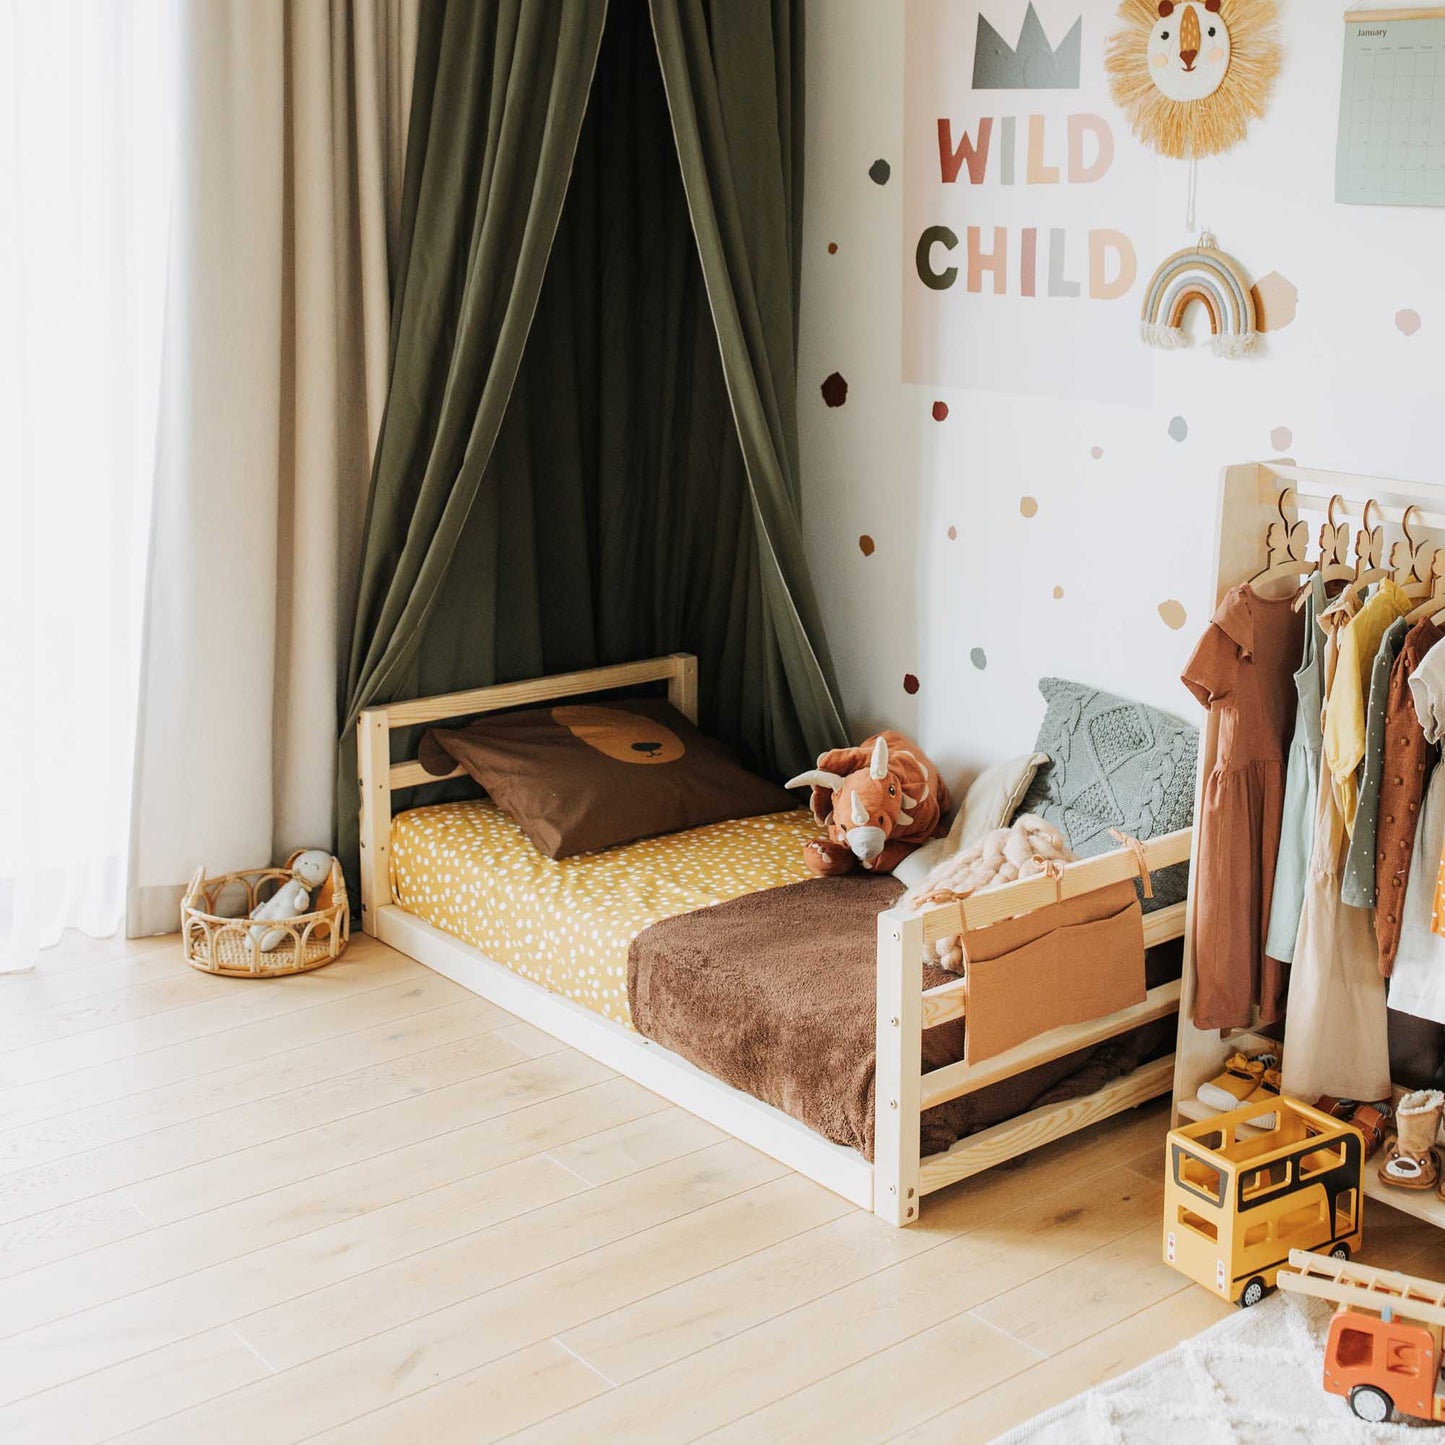 A child's room with a **Sweet Home From Wood long-lasting** 2-in-1 kids' bed with a horizontal rail headboard and footboard, clothes, and toys that can **grow with the child**.